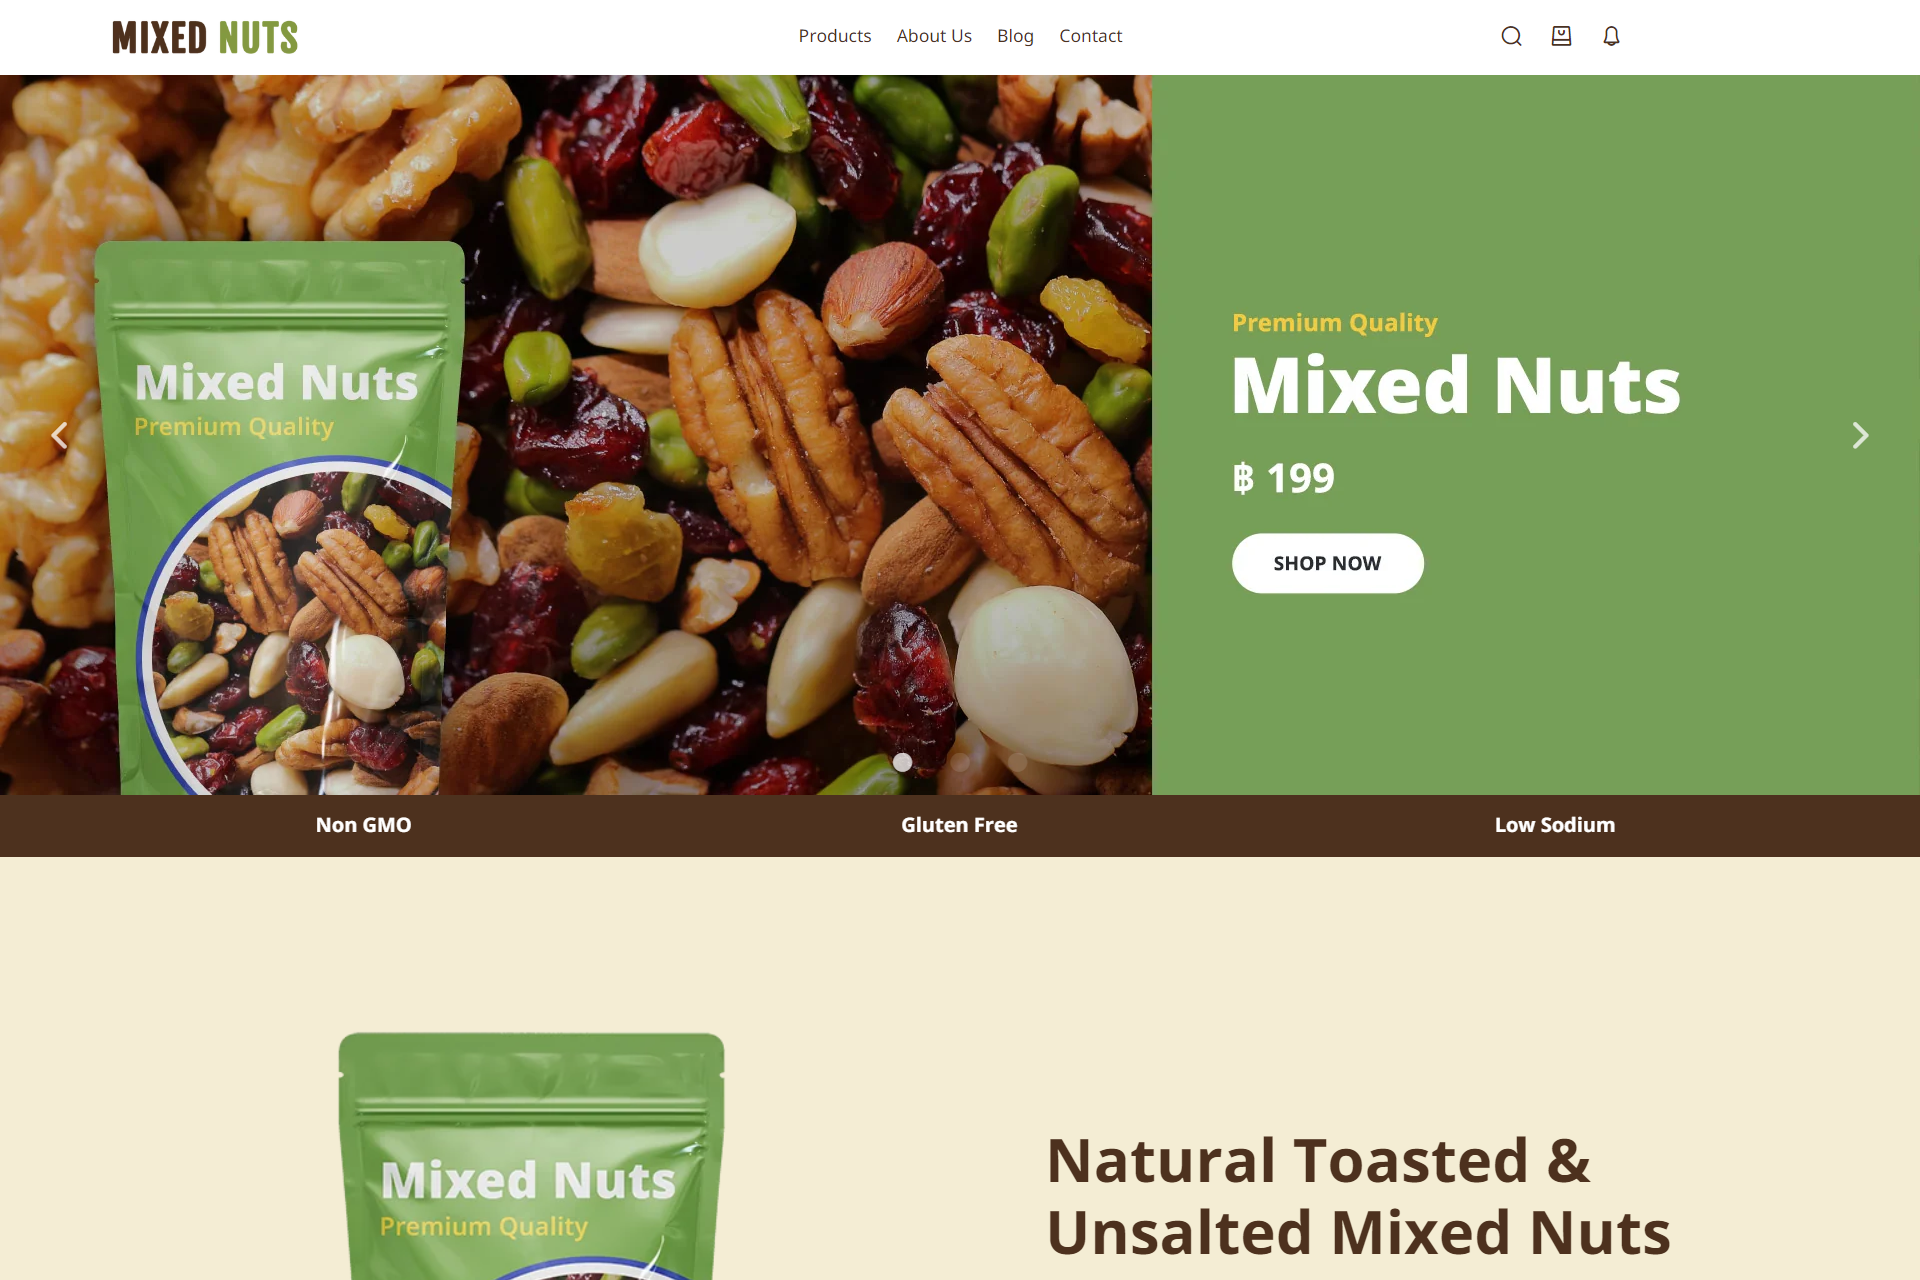 #1 website Mixed Nuts